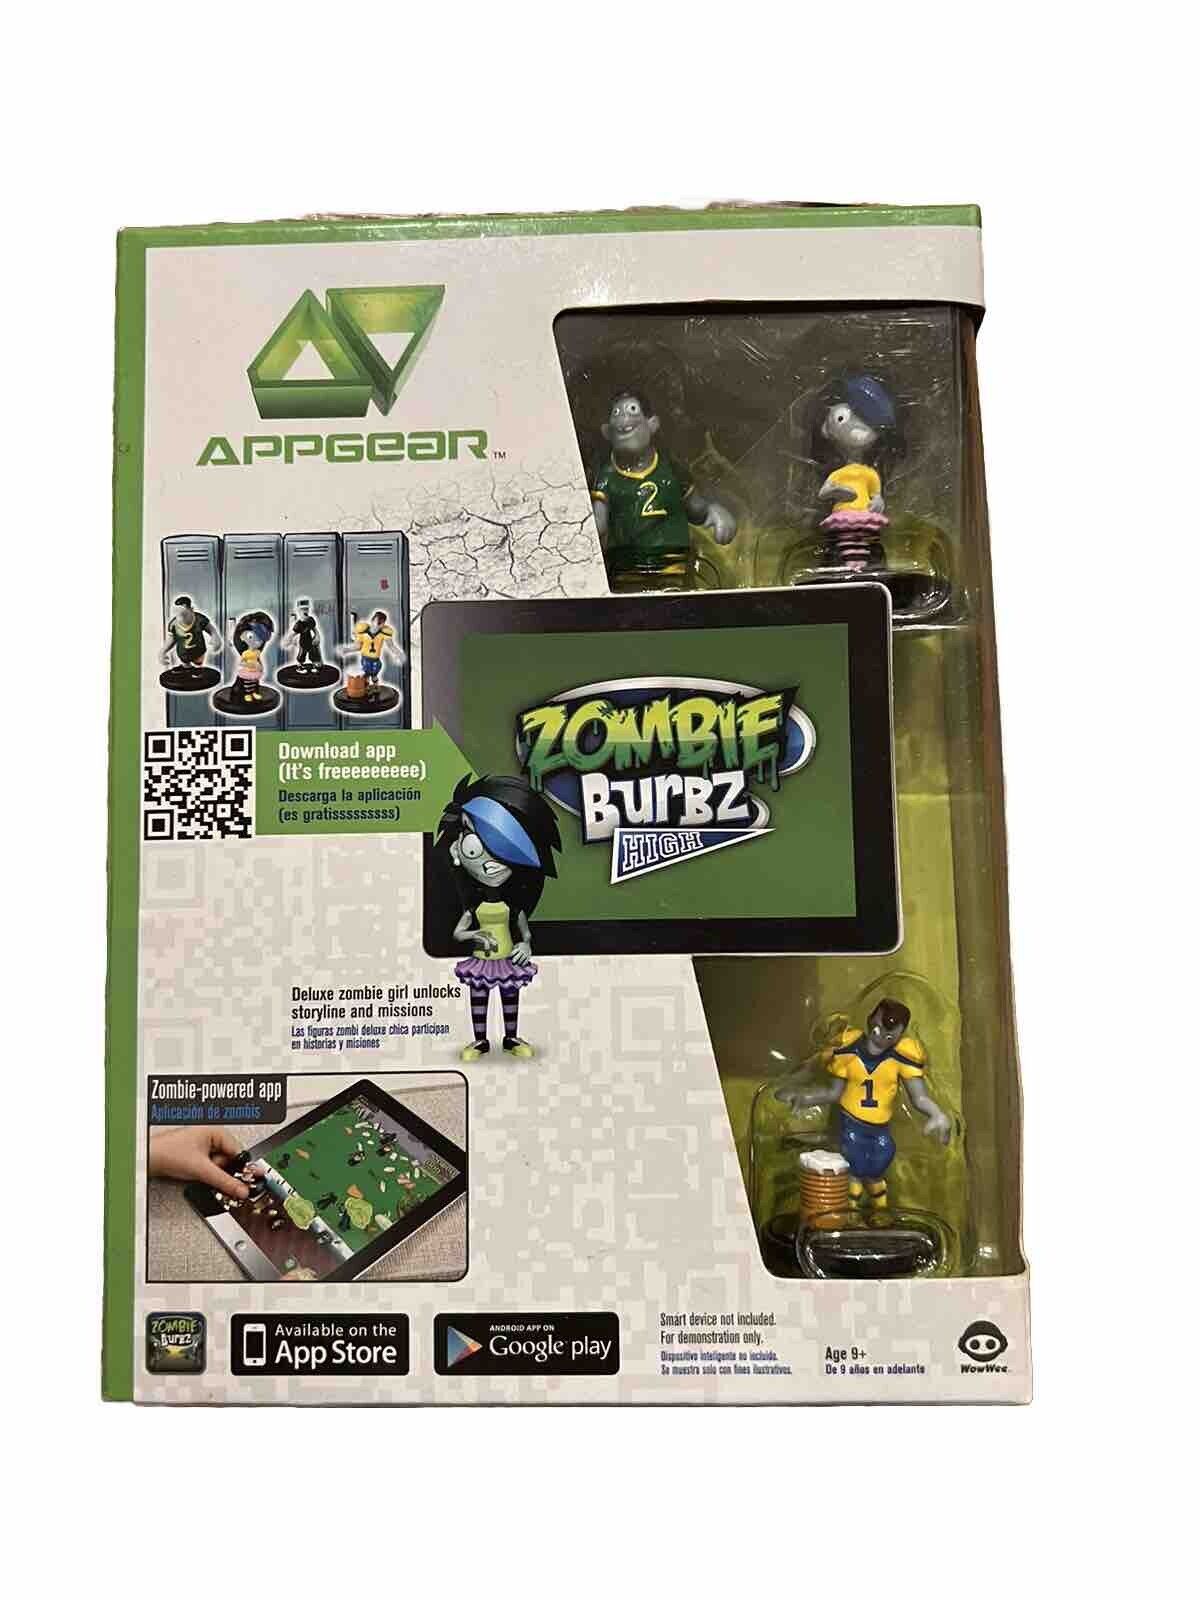 Appgear Zombie Burbz High for ipad & Google Android Game / Open Box